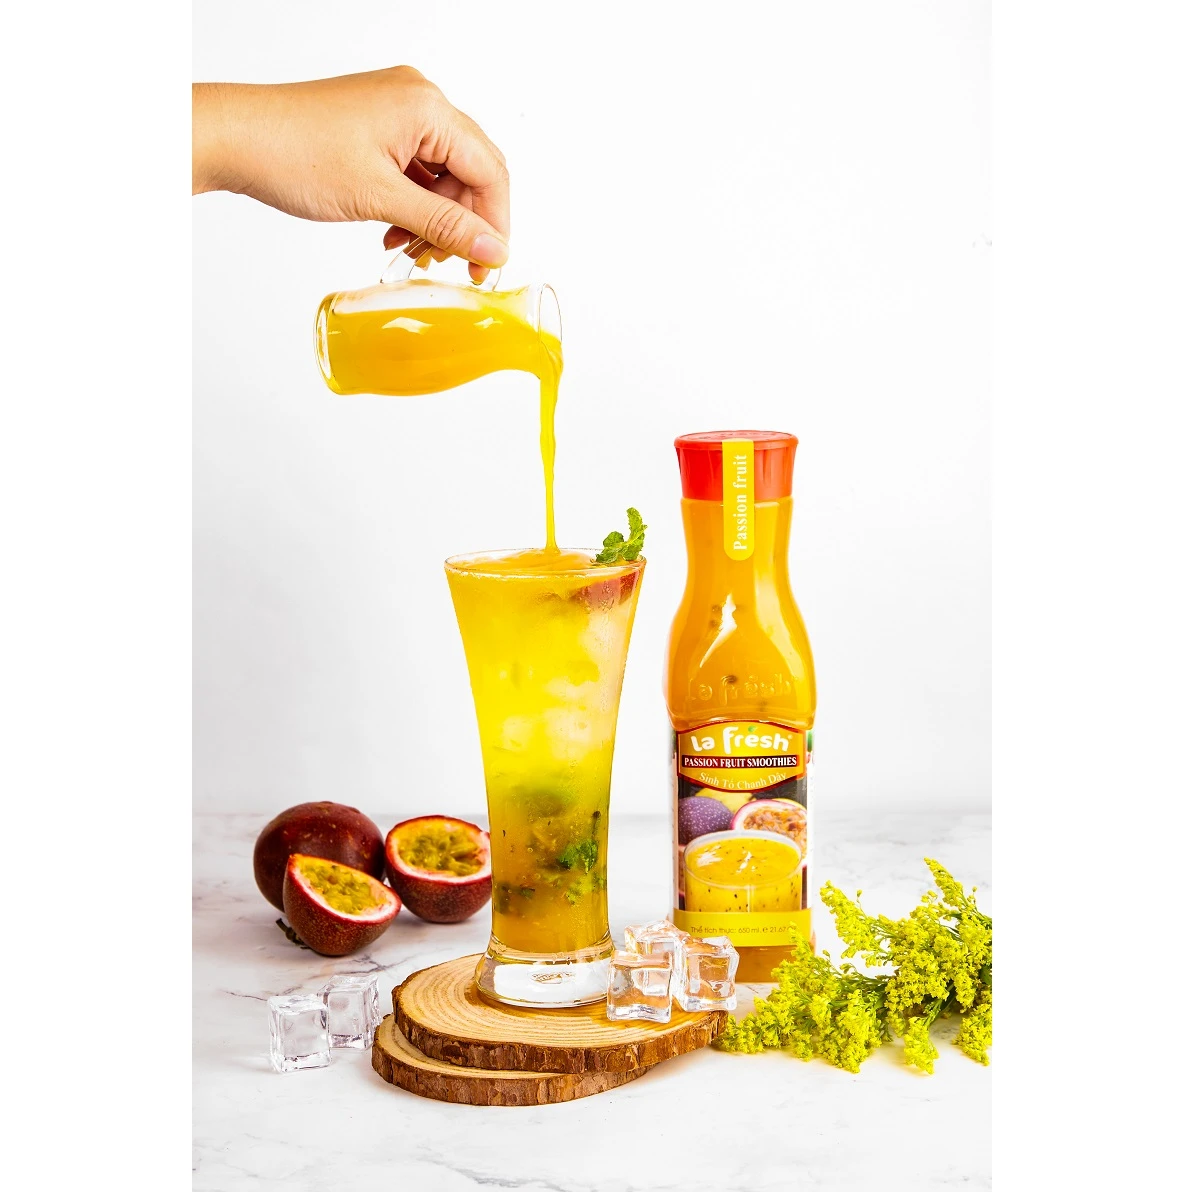 Fresh Squeezed Tropical Passion Fruit Smoothies in Box Packaging From Vietnam